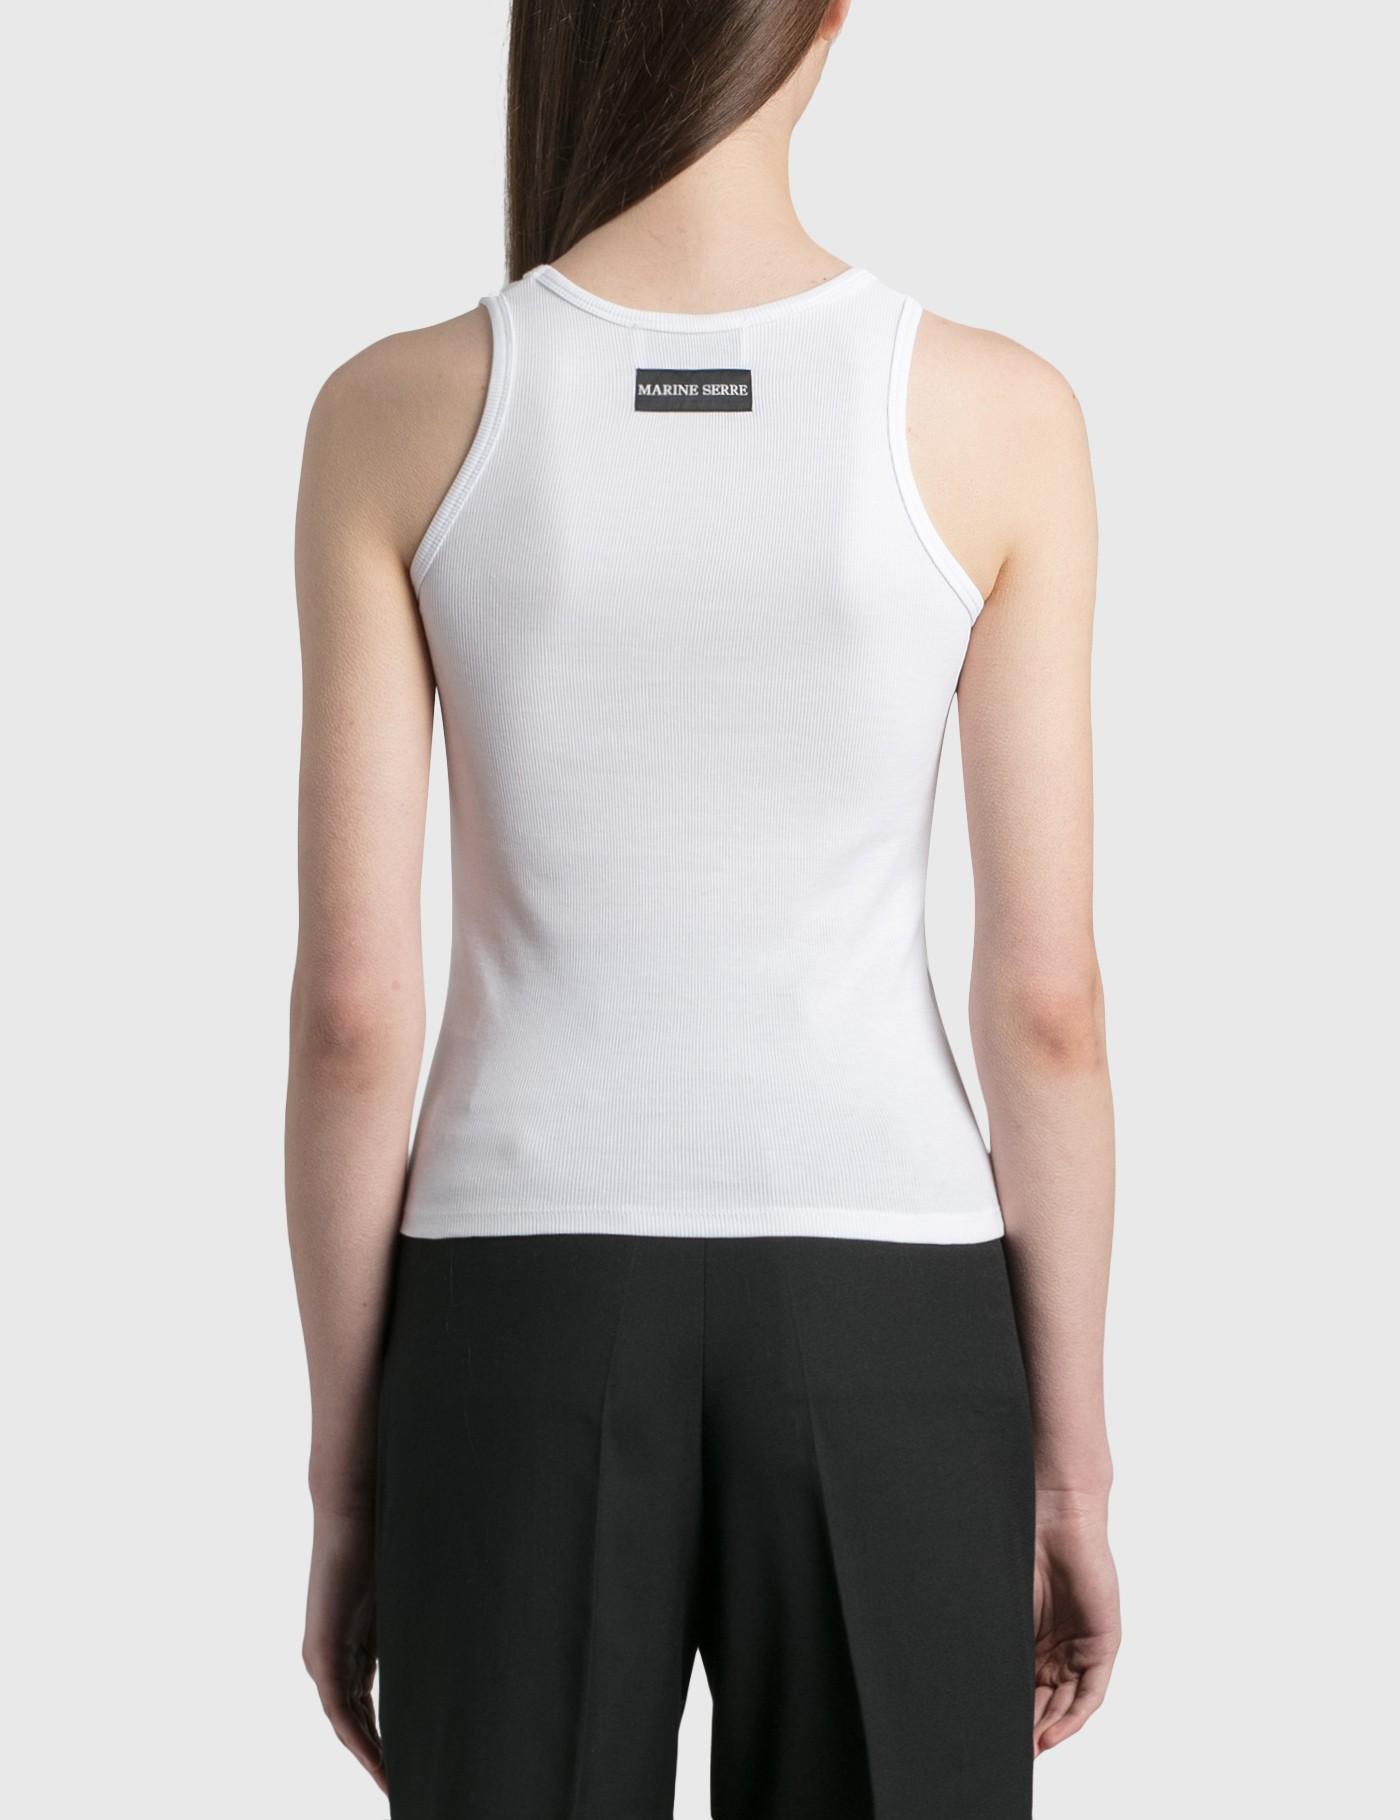 Marine Serre Ribbed Cotton Branded Tank Top in White - Lyst